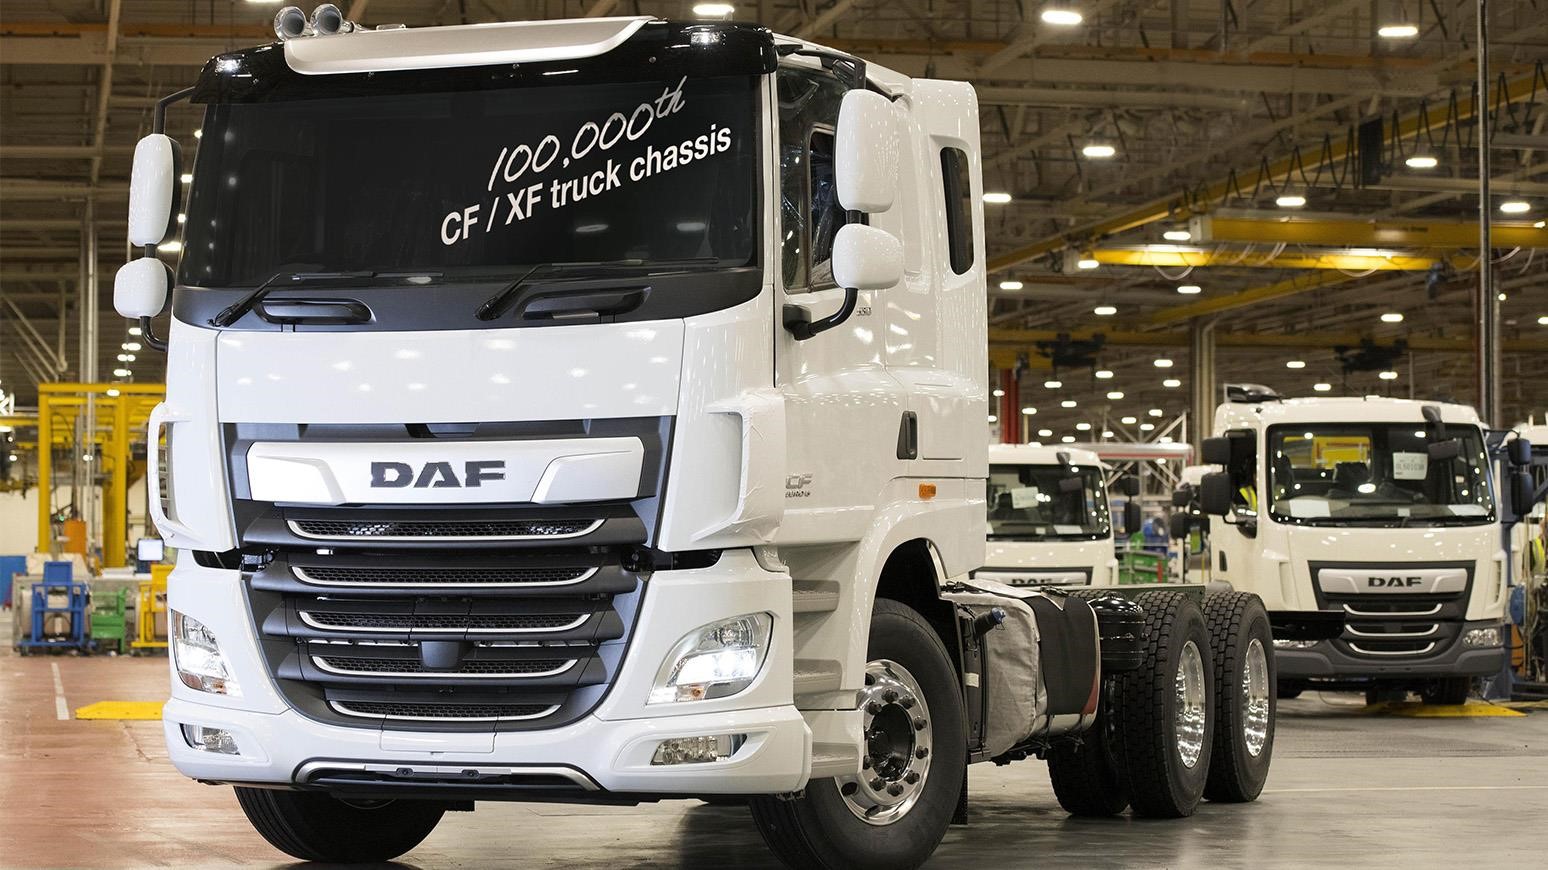 Leyland Trucks Produces Its 100,000th DAF CF/XF Truck, A CF 530 FAT 6x4 Drawbar Chassis To Be Exported To Australia